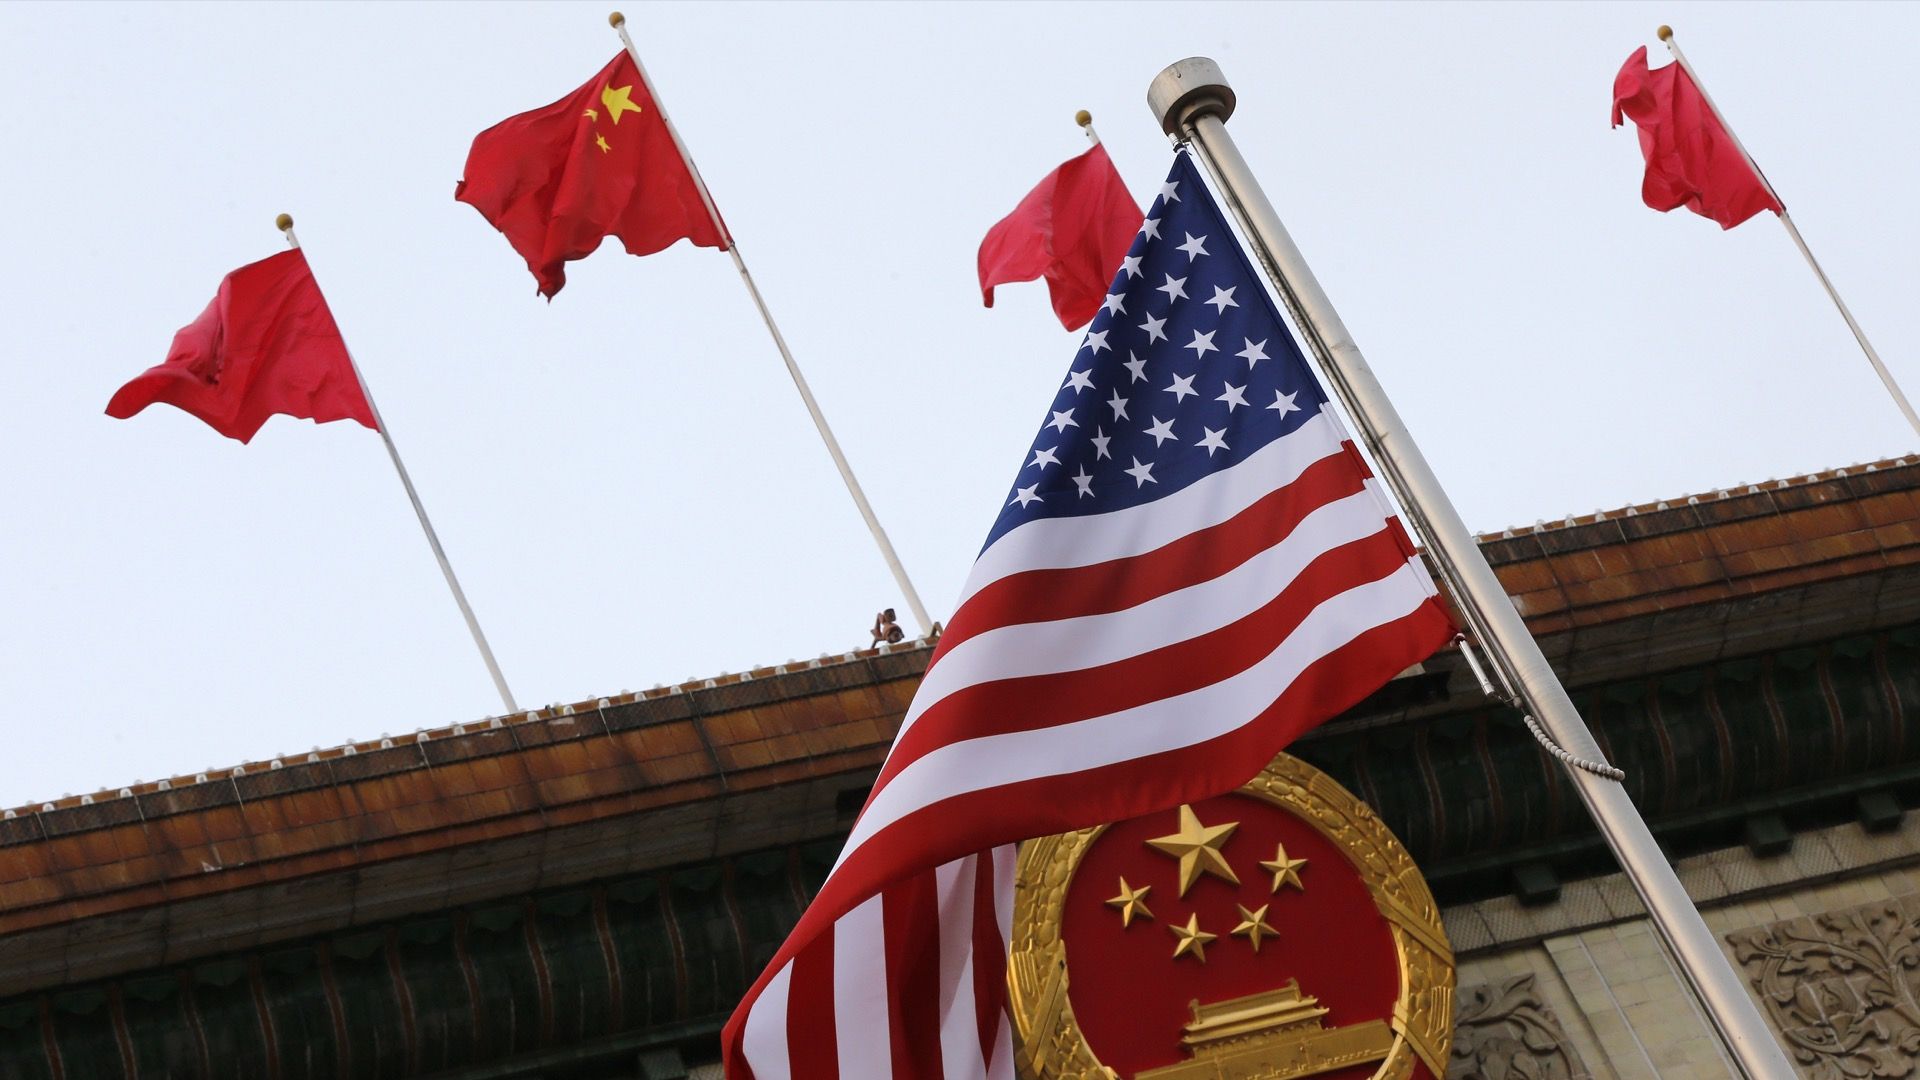 Chinese and American flags wave